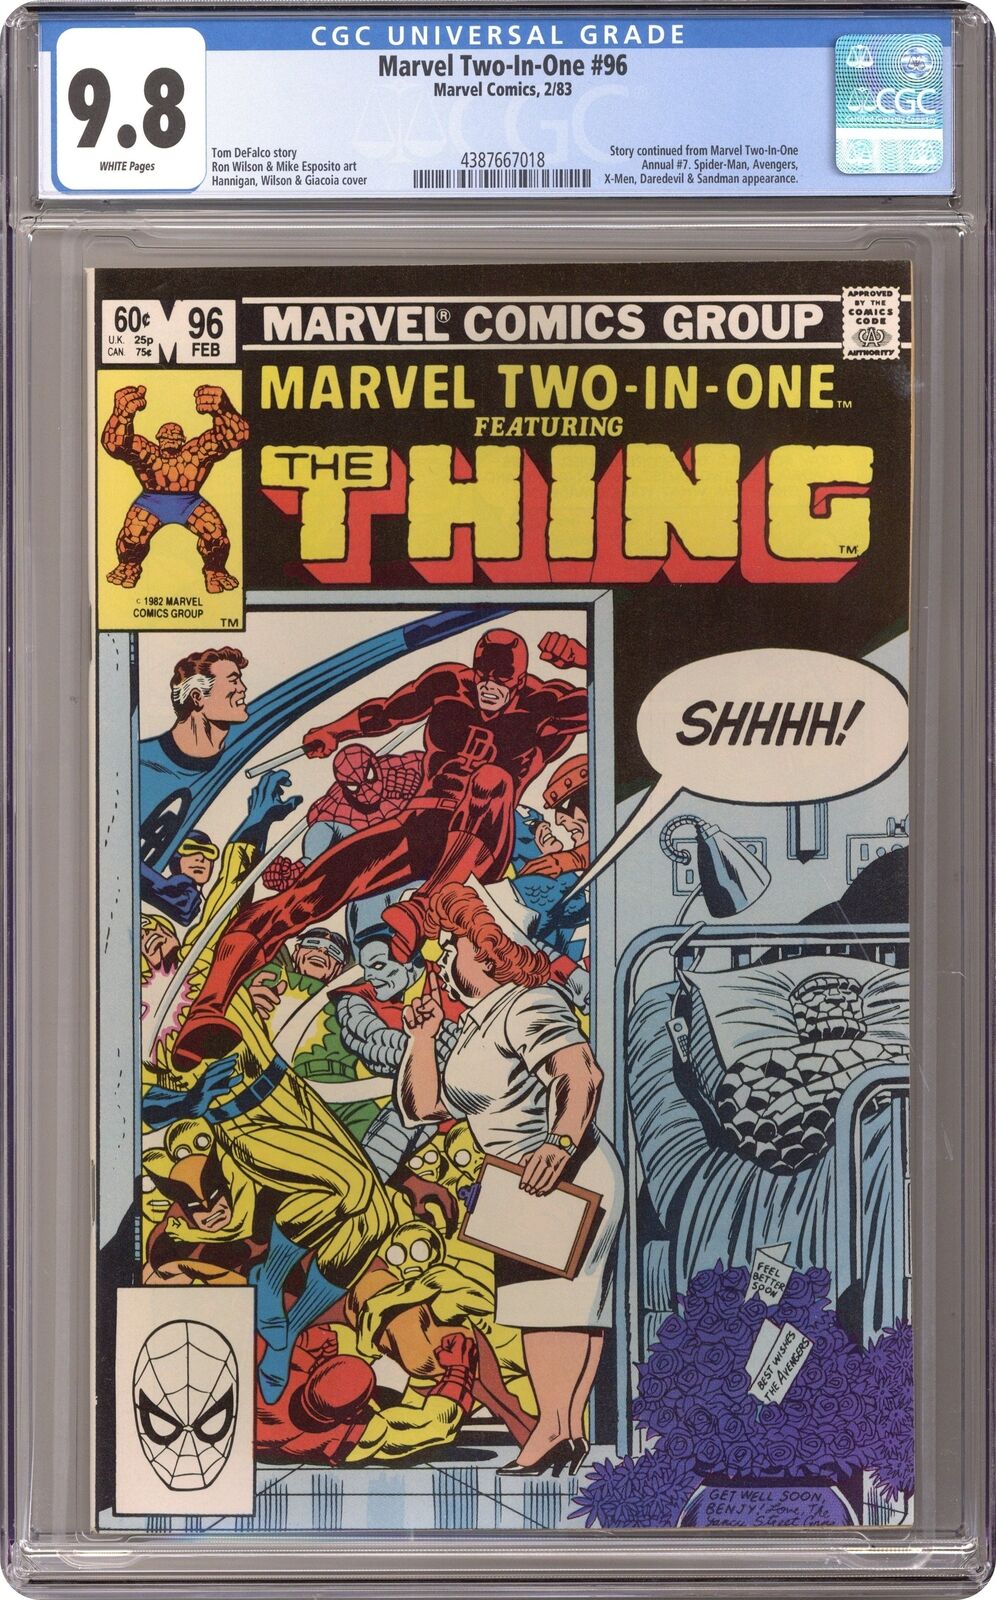 Marvel Two-in-One #96 CGC 9.8 1983 4387667018